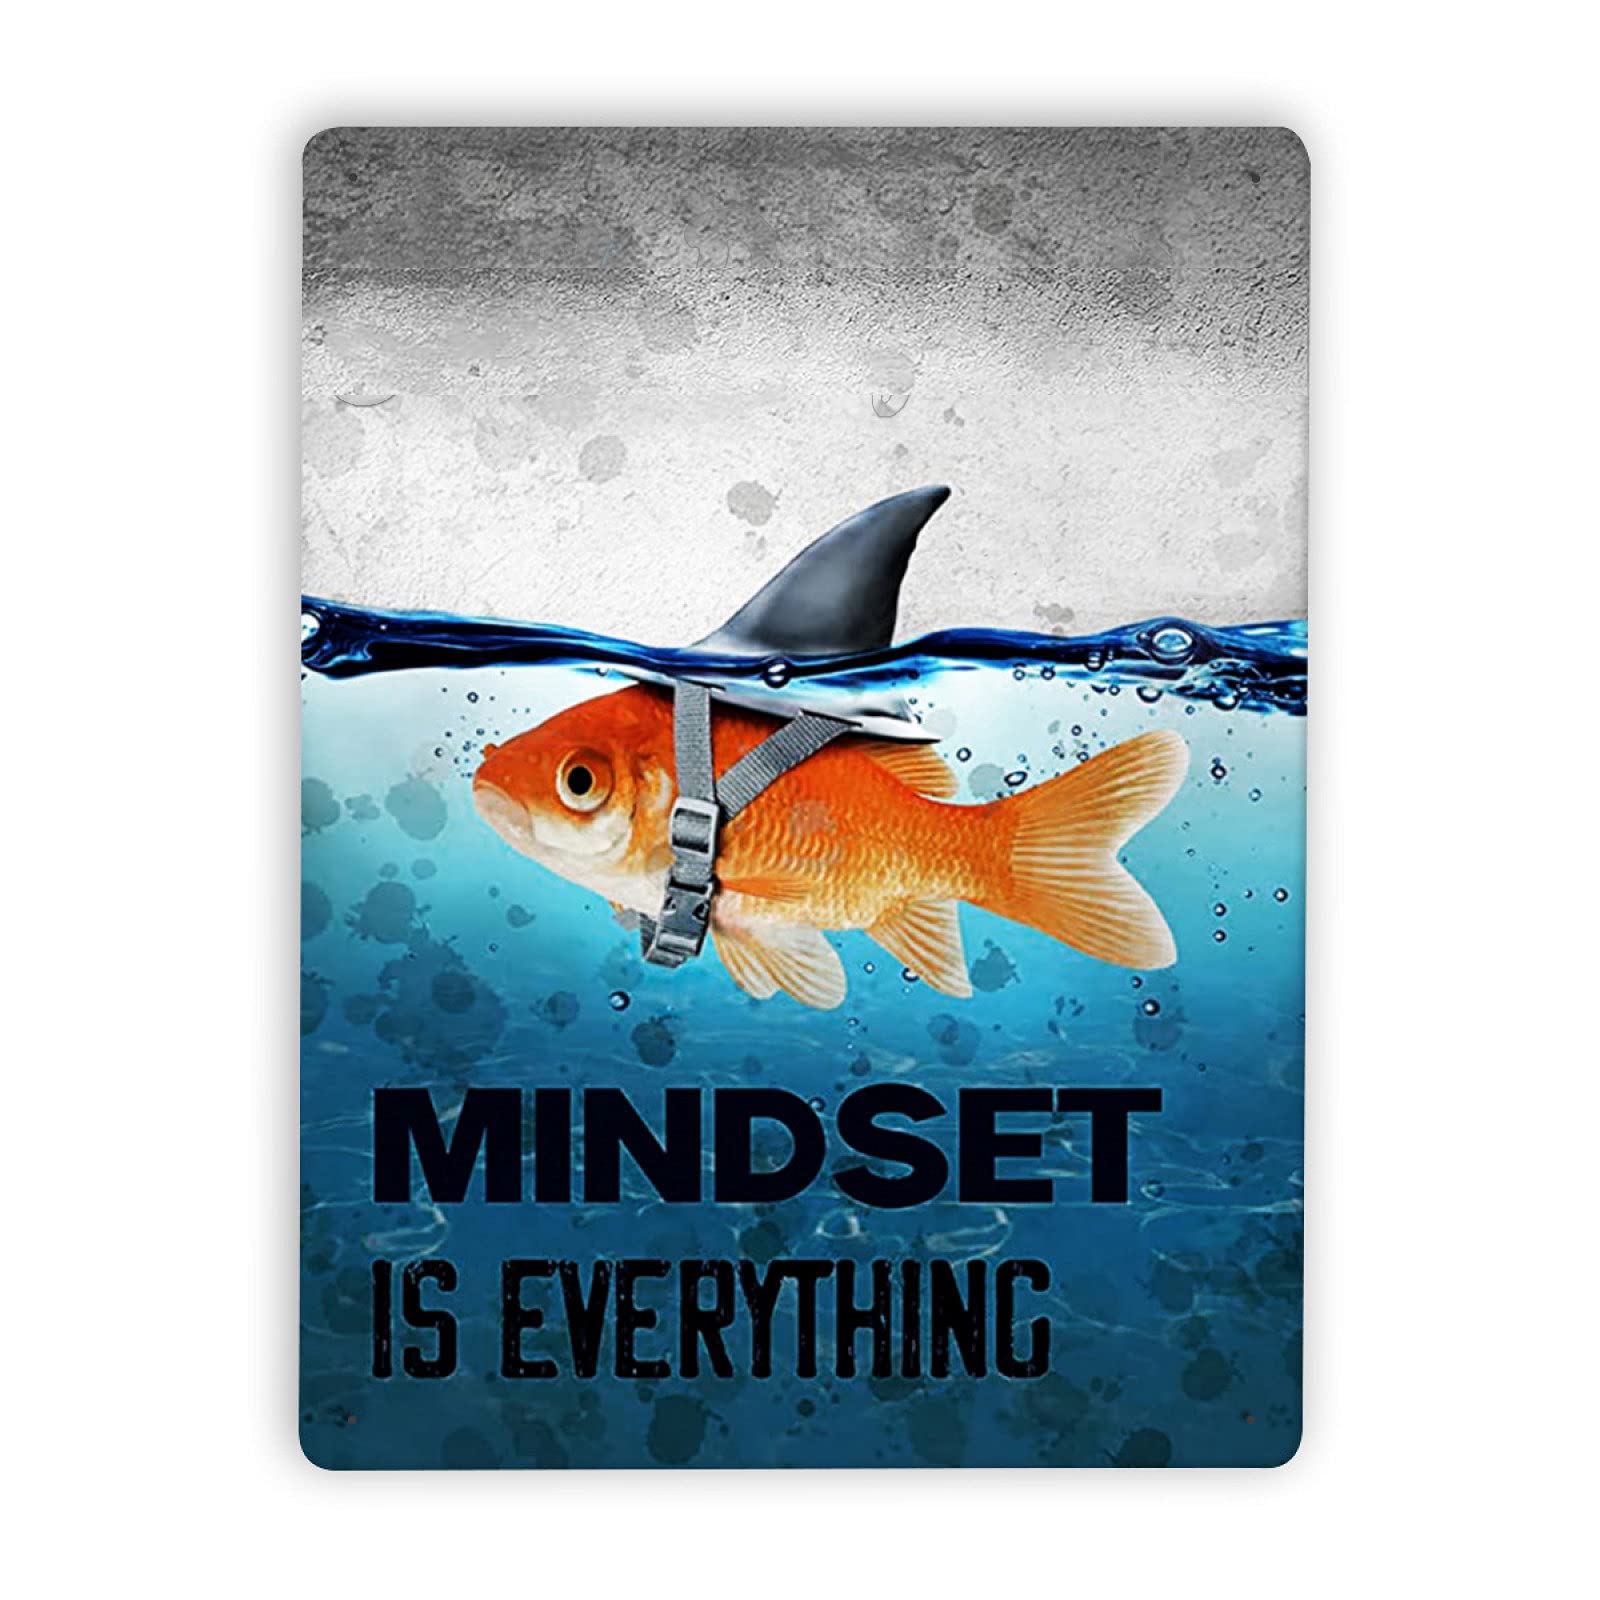 STAPTOP Mindset is Everything Motivational Wall Art Inspirational Entrepreneur Quotes Metal Sign for Living Room Bedroom Office, Cute Fish Home Decor Metal Sign 8''x12'', 8 x 12 Inch, Home